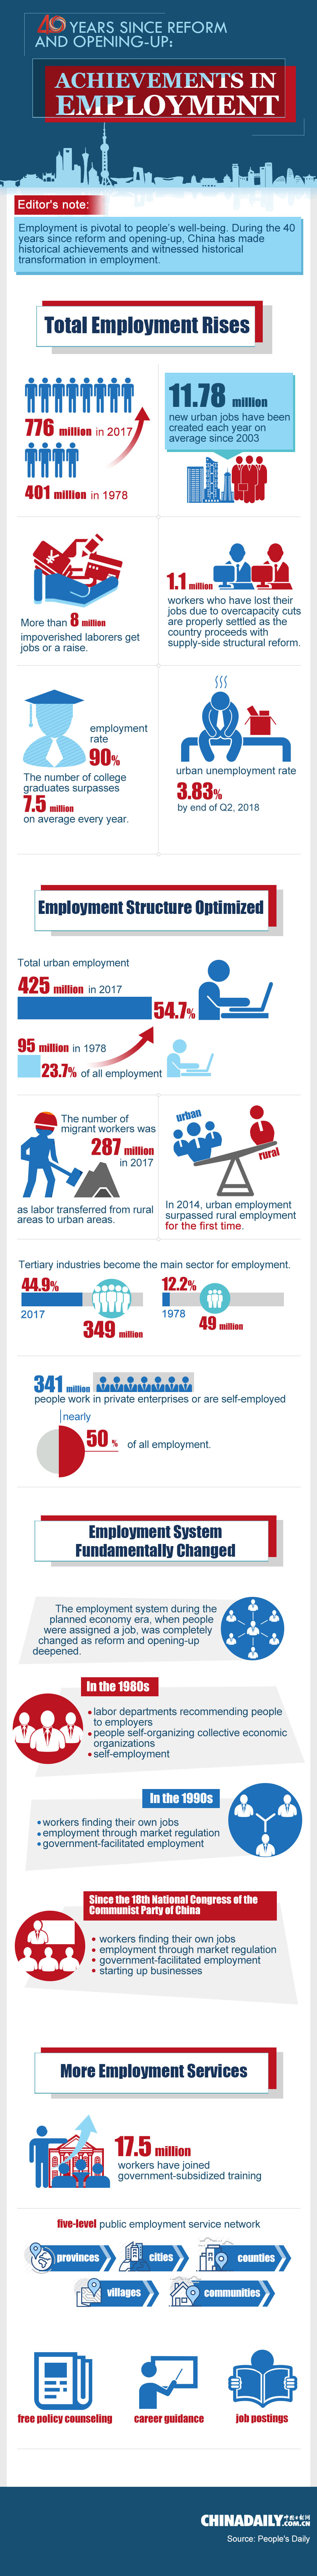 40 Yrs on: Changes in Employment